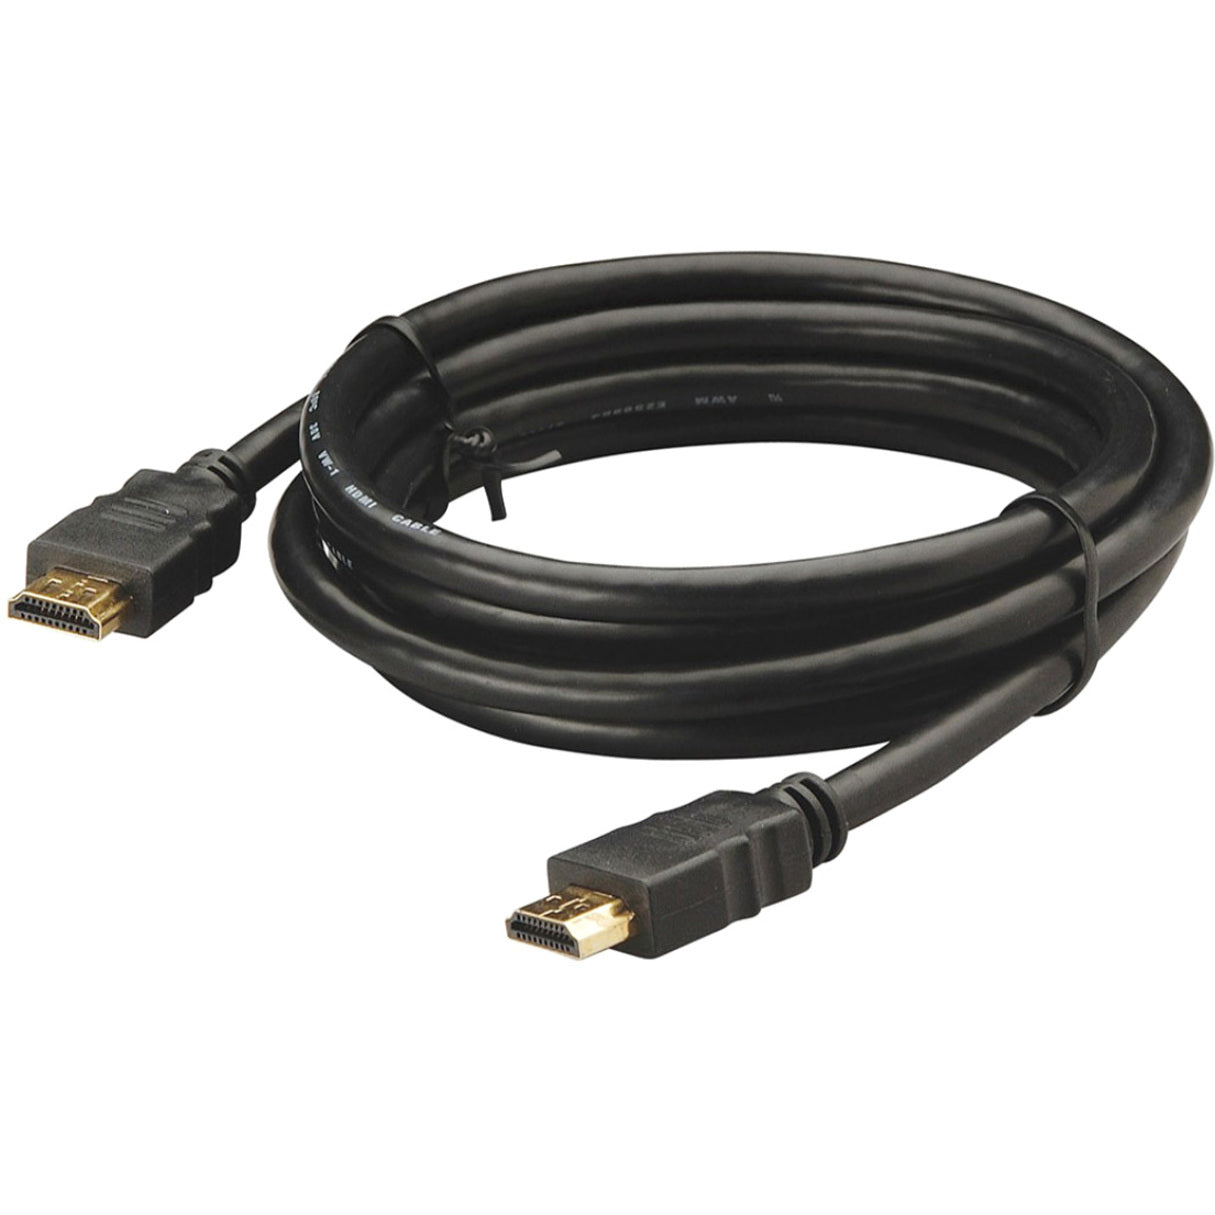 4XEM 4XHDMI4K2KPRO6 6ft 1.8m Ultra High Speed 4K2K HDMI Cable, Audio Return Channel, Strain Relief, EMI/RF Protection